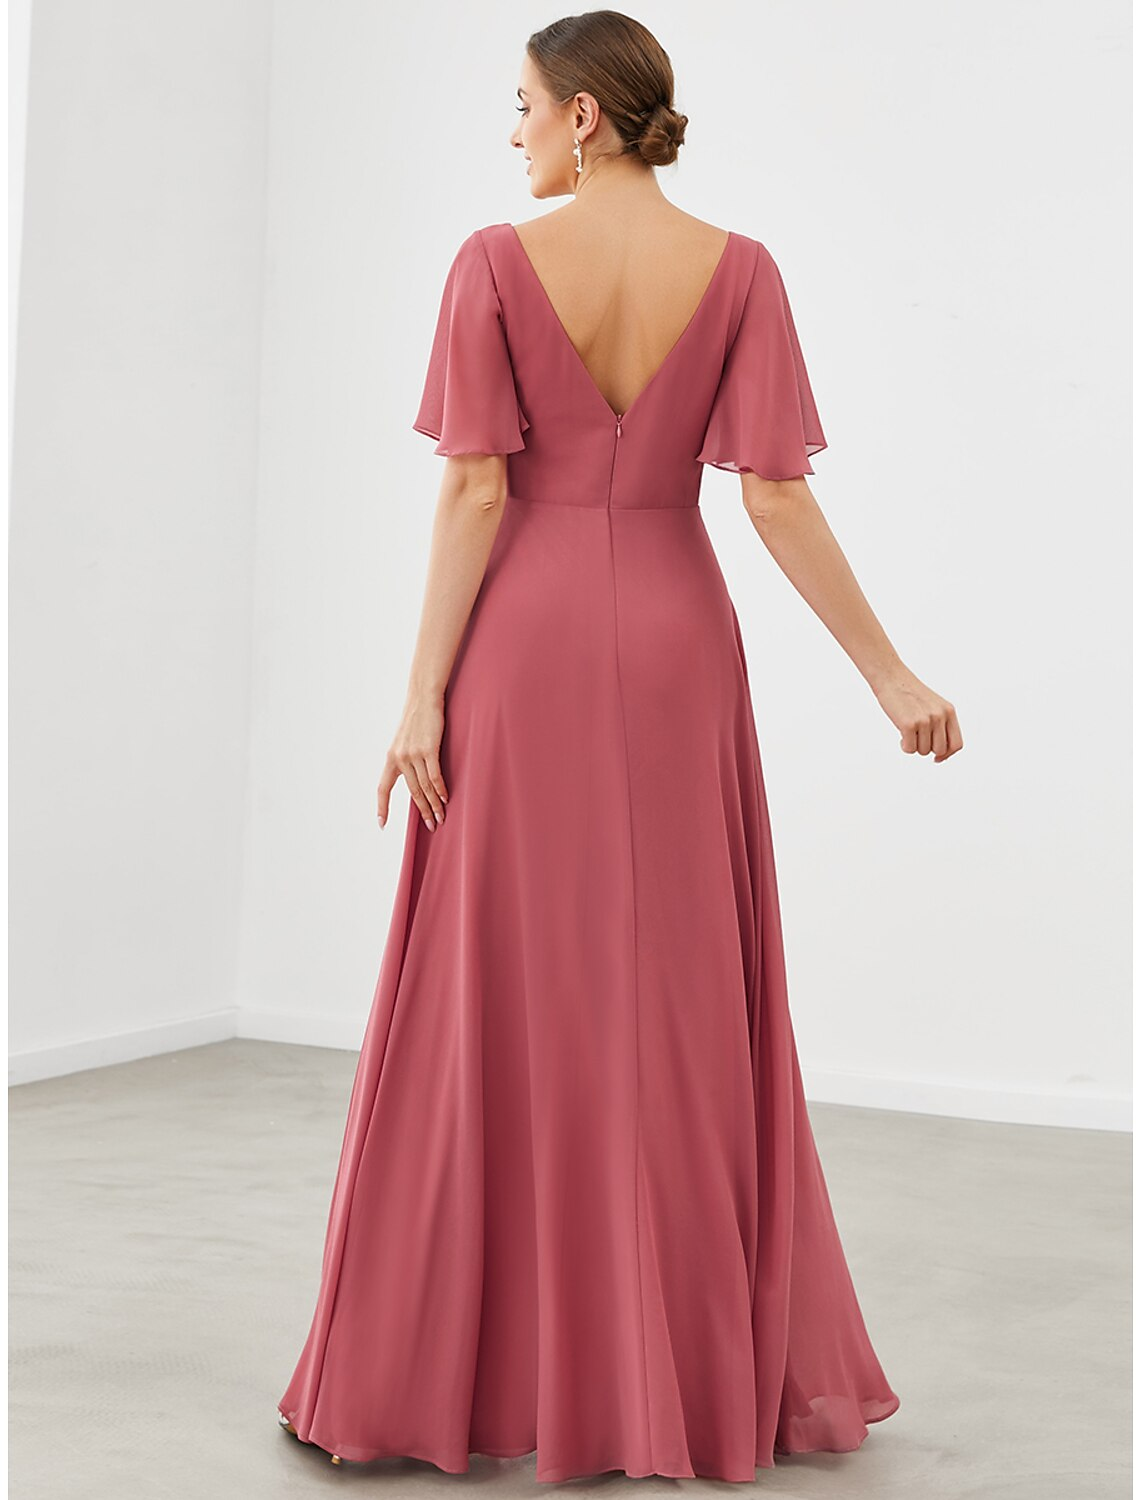 A-Line Bridesmaid Dress V Neck Short Sleeve Plus Size Floor Length Chiffon with Pleats / Draping / Solid Color